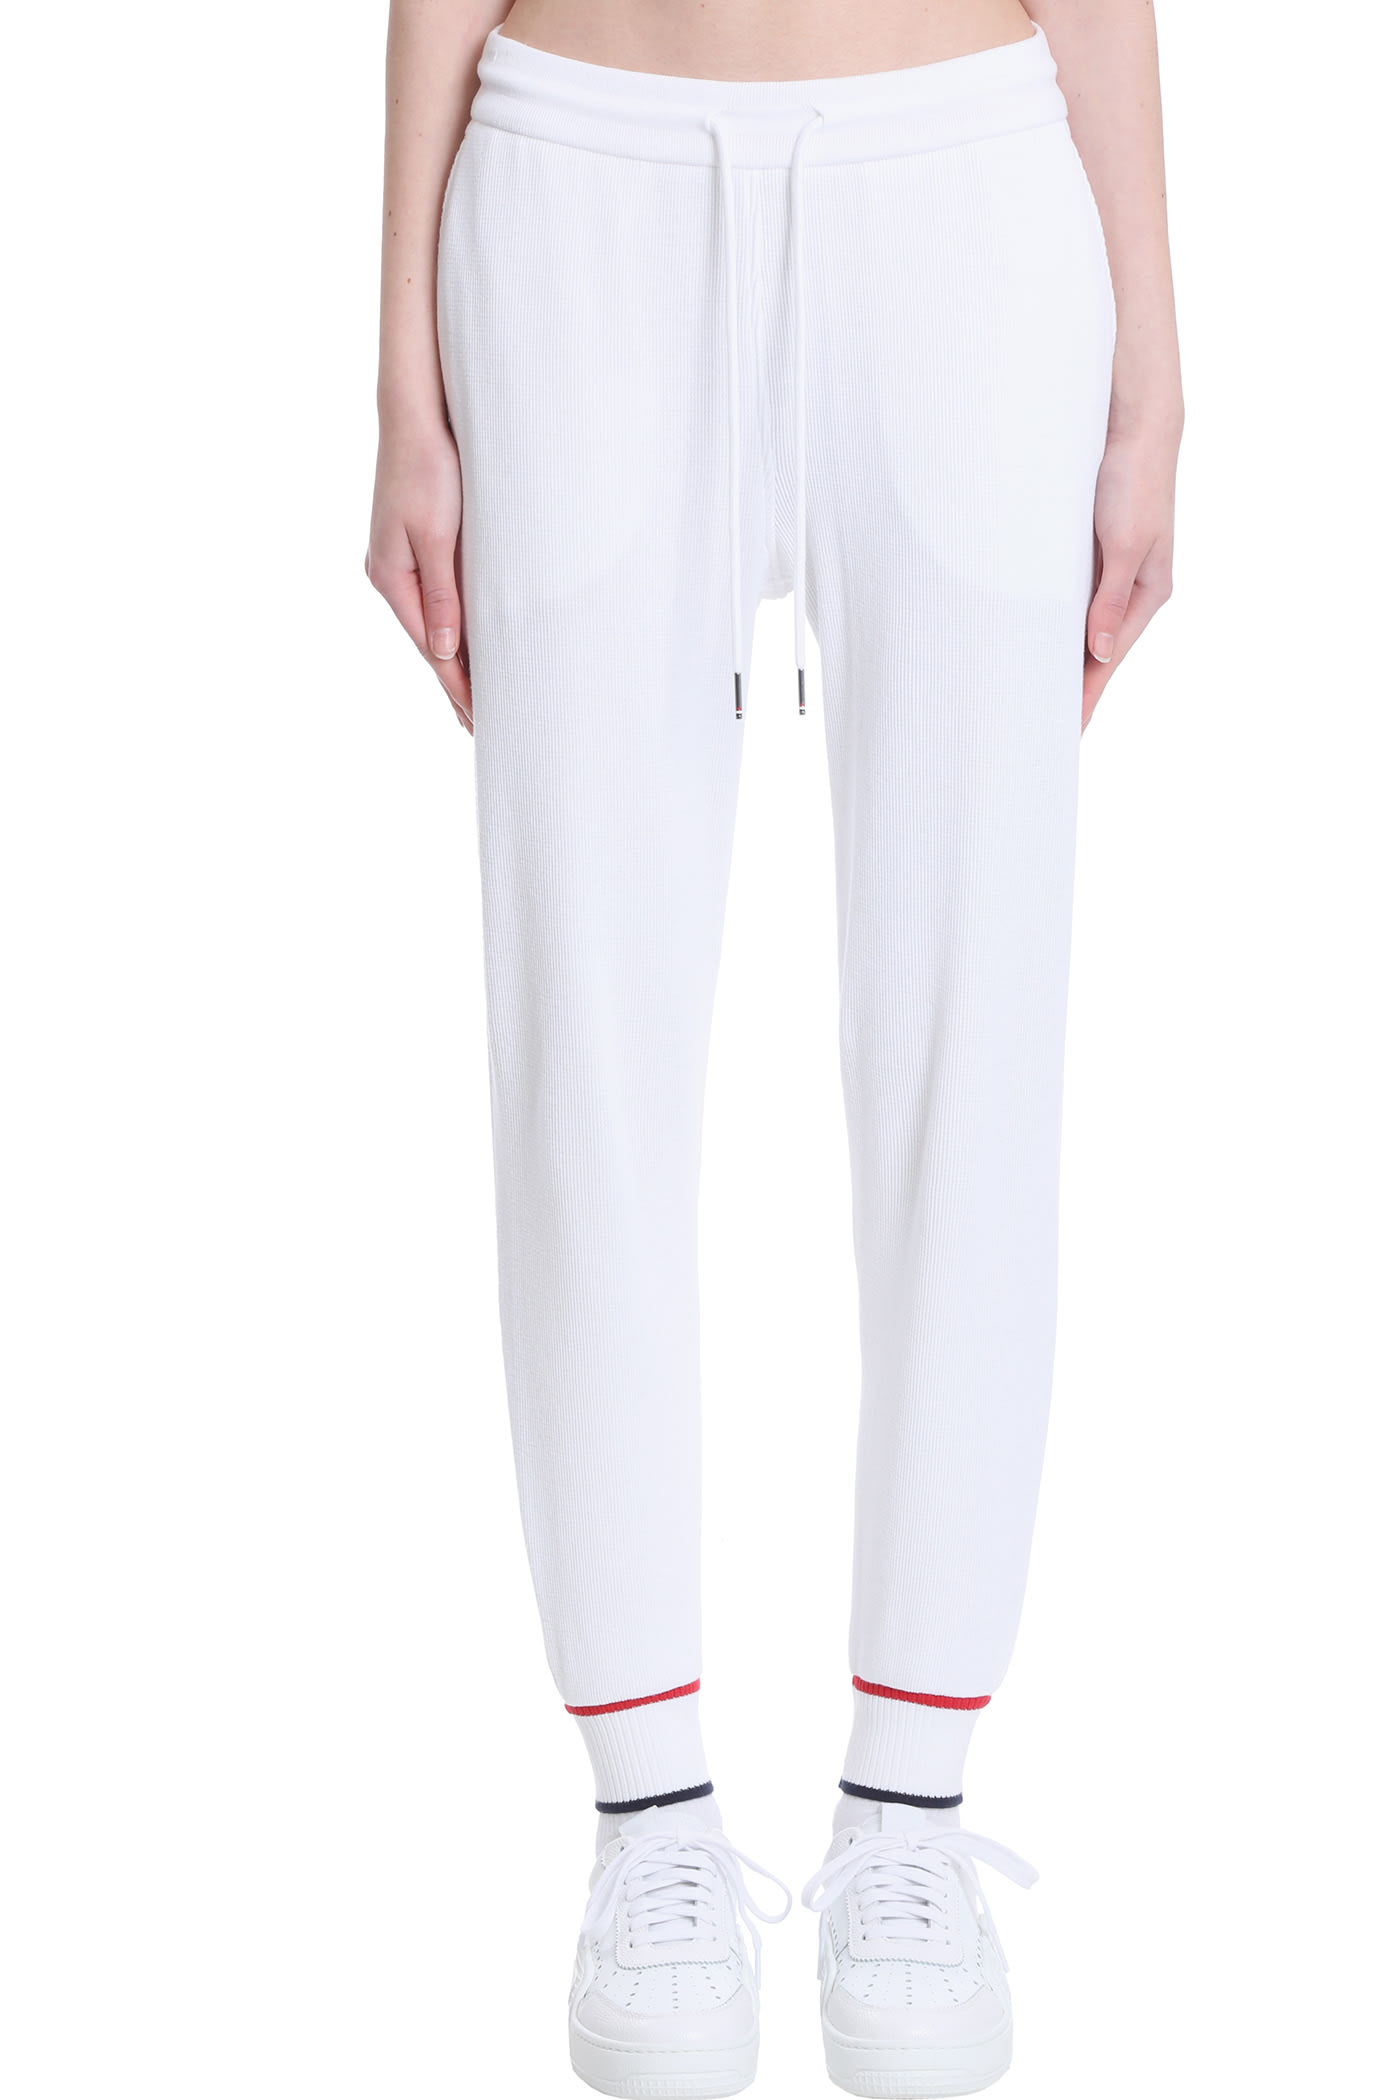 Thom Browne Pants In White Cotton